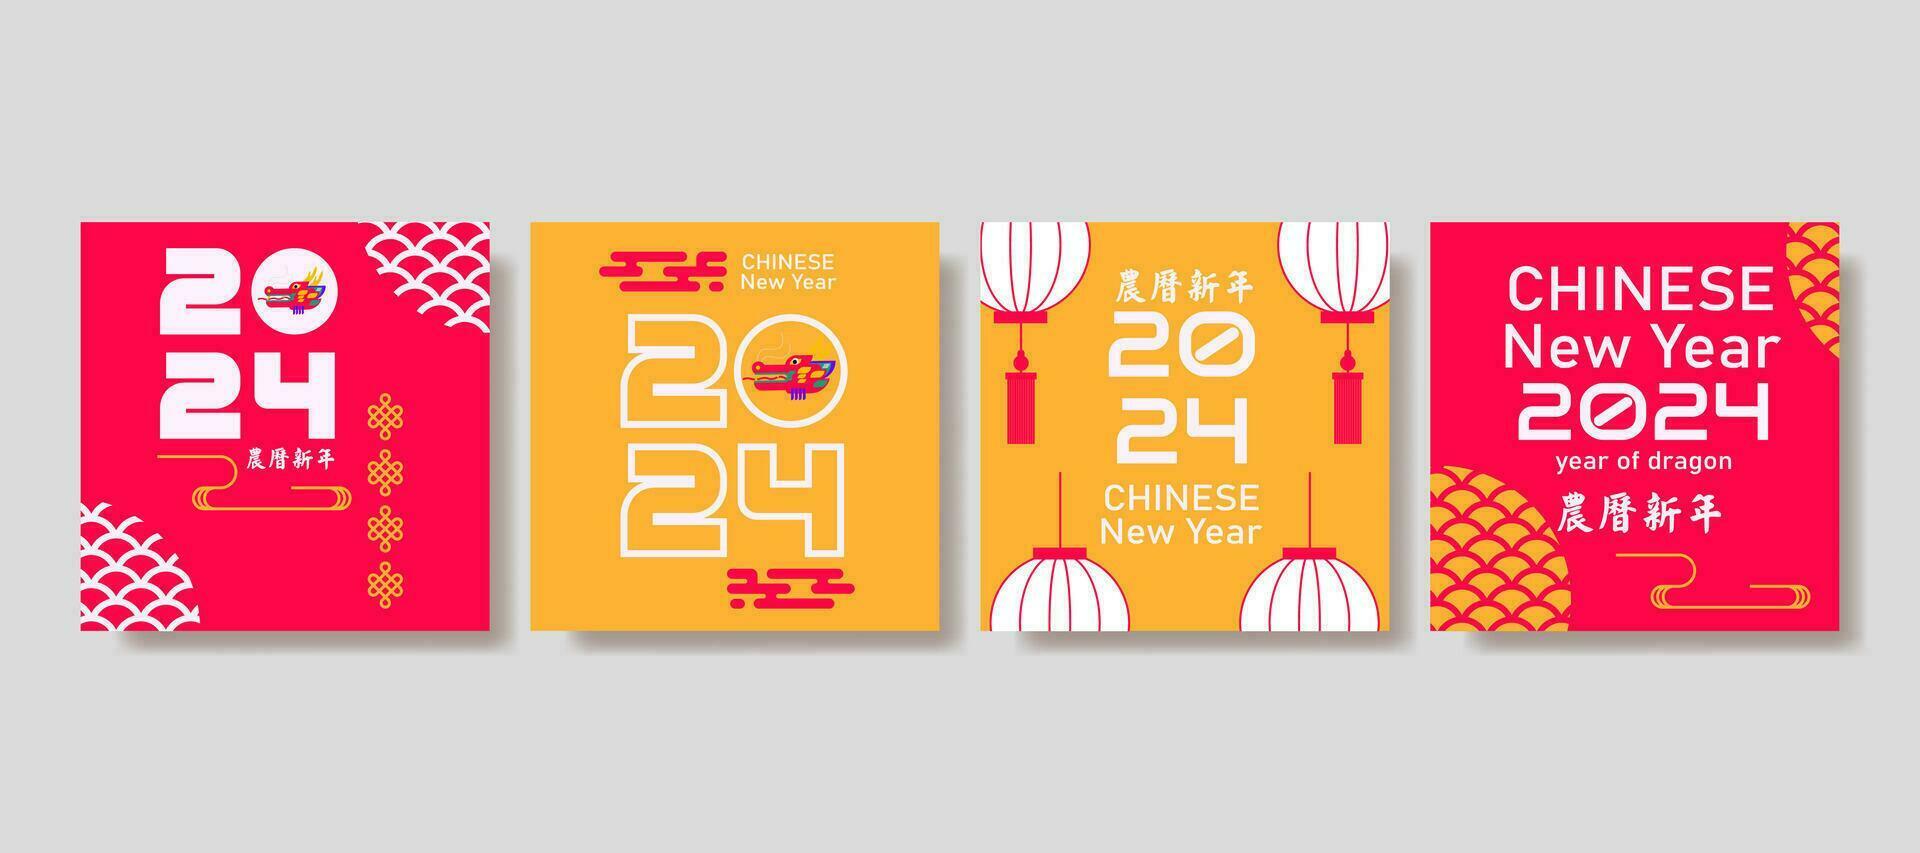 modern art Chinese New Year 2024 design set in red, yellow and white colors for social media post, cover, card, poster, banner vector